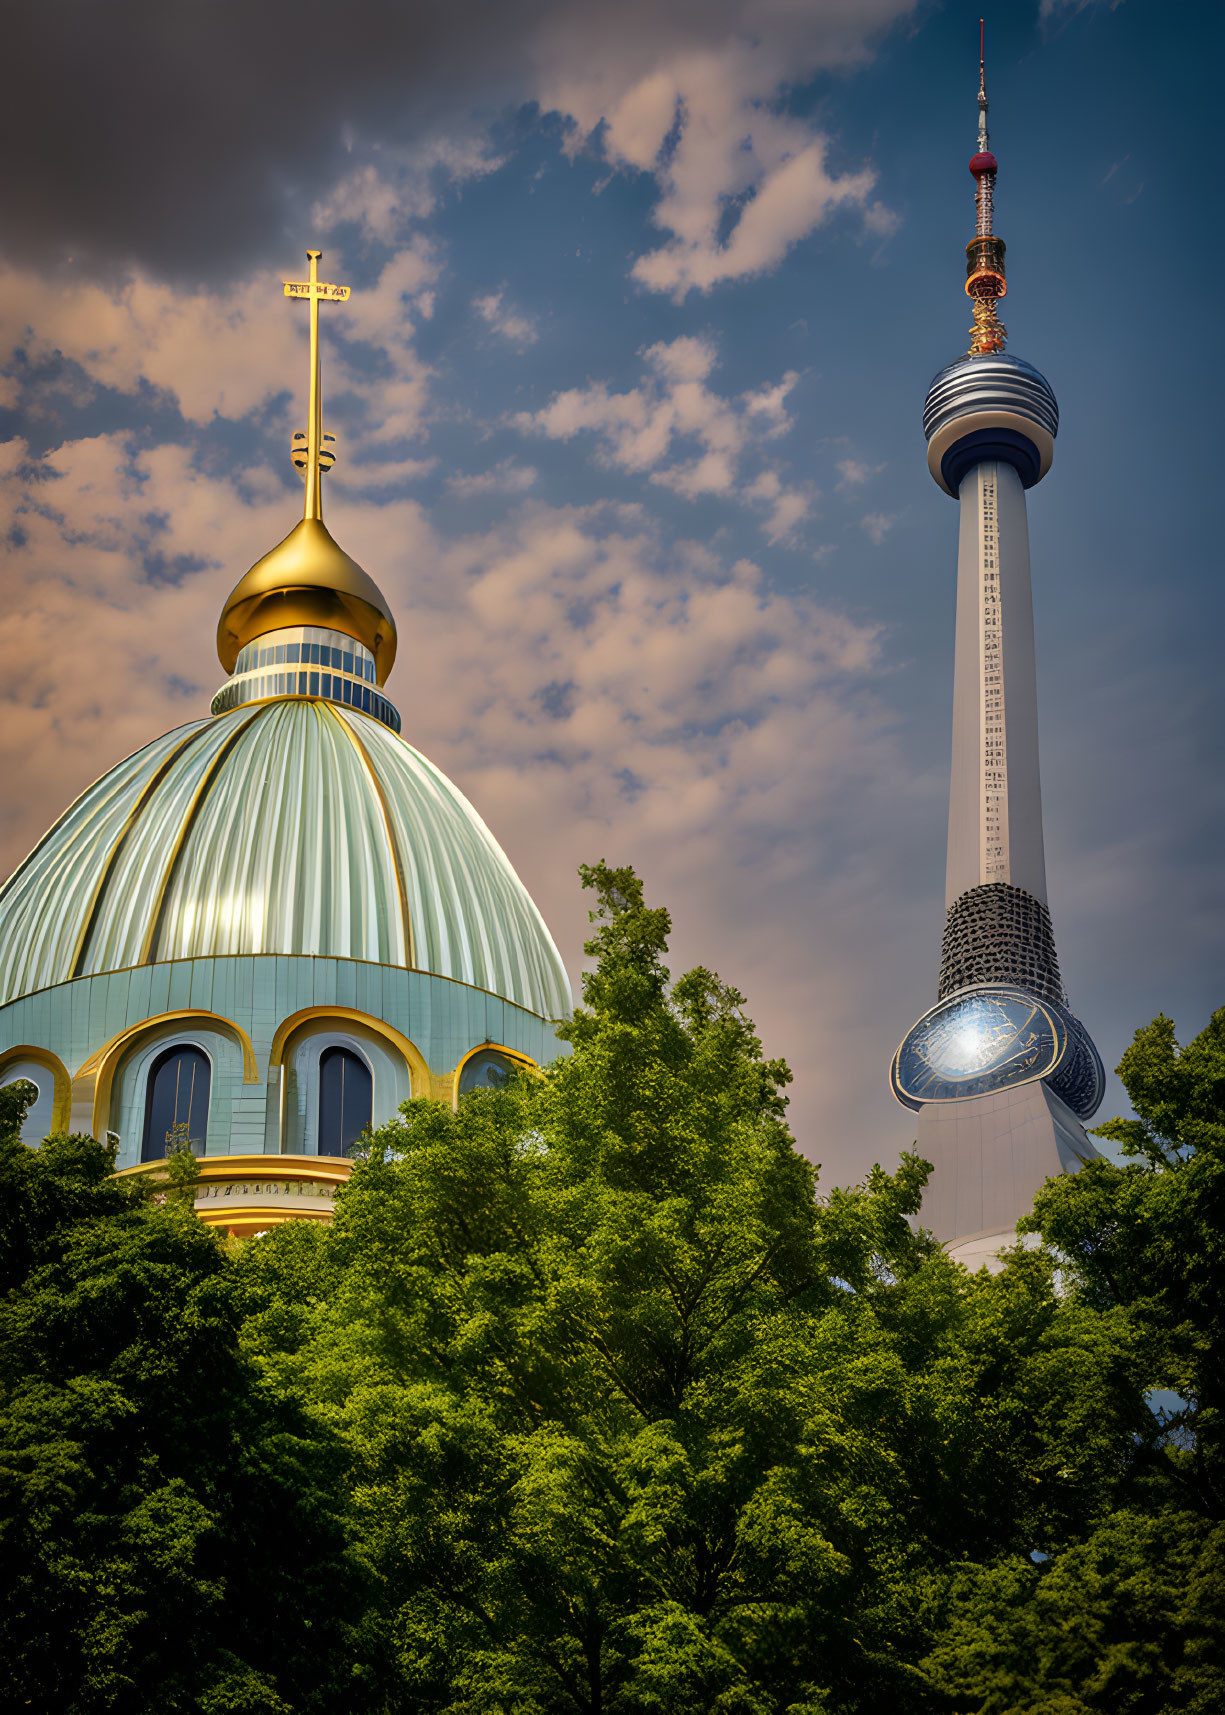 TV Tower- The dome of the church with a golden knu